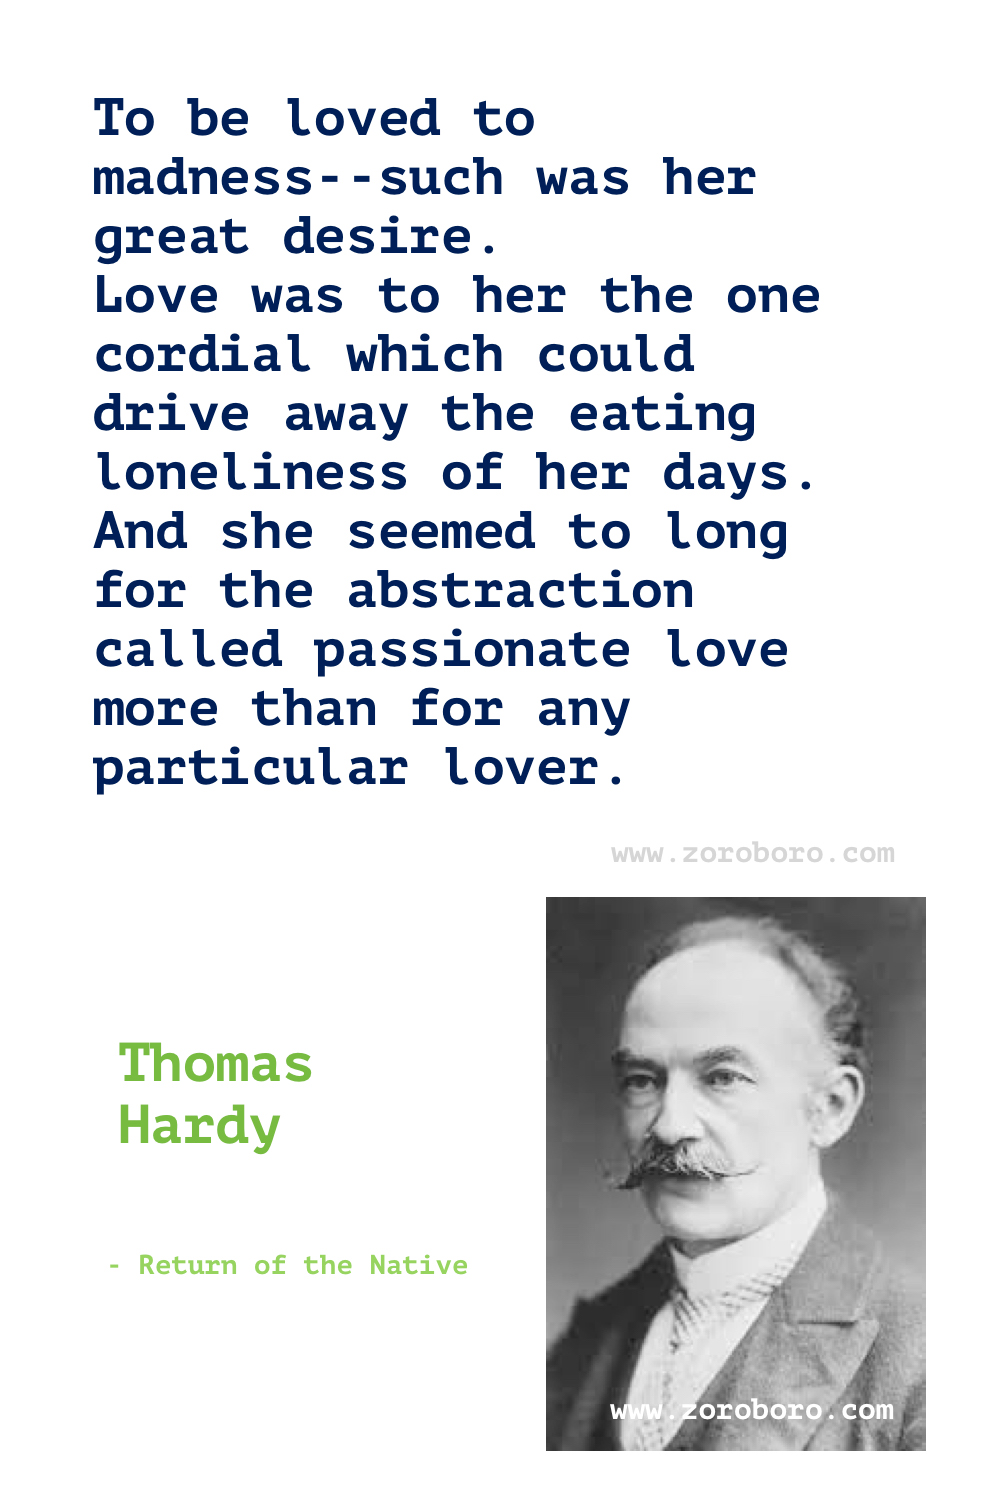 Thomas Hardy Quotes, Thomas Hardy Books Quotes, Thomas Hardy Poems, Thomas Hardy Novel Quotes. Thomas Hardy Quotes, Far From the Madding Crowd Quotes, Tess of the D'Urbervilles Quotes & Jude the Obscure Quotes.